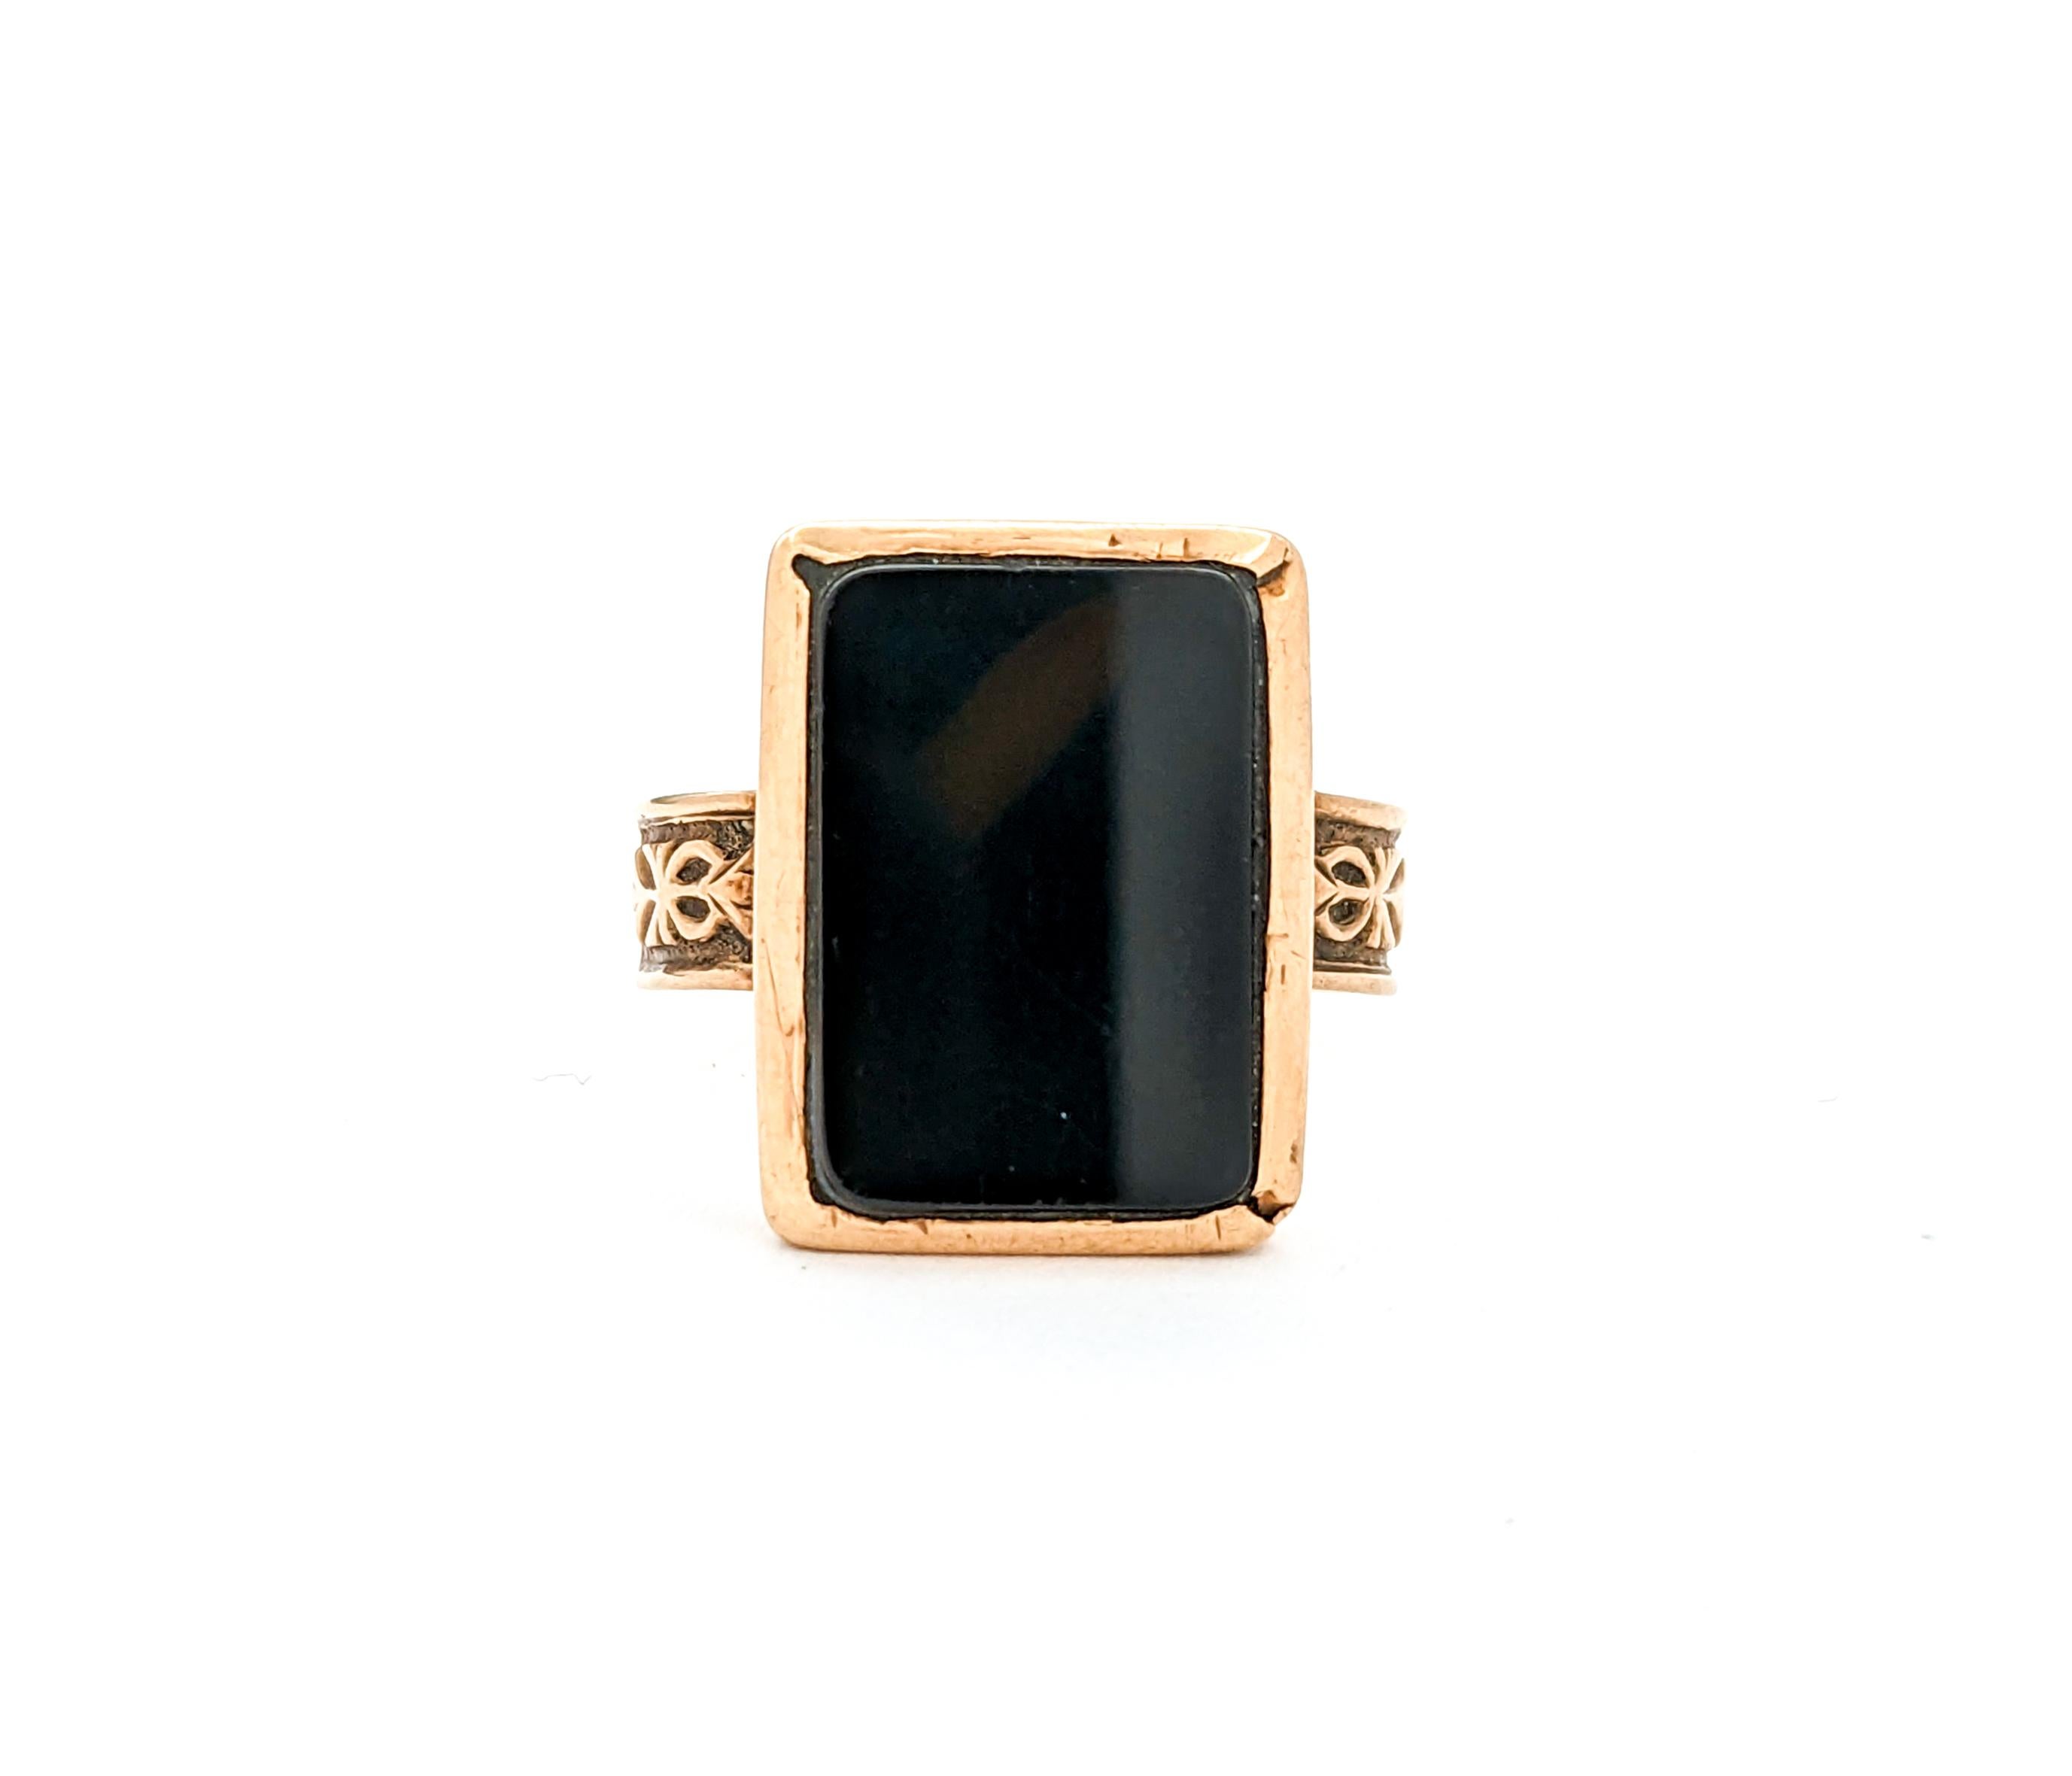 Antique Victorian Onyx Ring In Yellow Gold

Step back in time with this exquisite Antique Ring from the Victorian era, meticulously crafted in 10k yellow gold. This piece features a glossy 15x11mm rectangular Onyx as its centerpiece. The Onyx, known